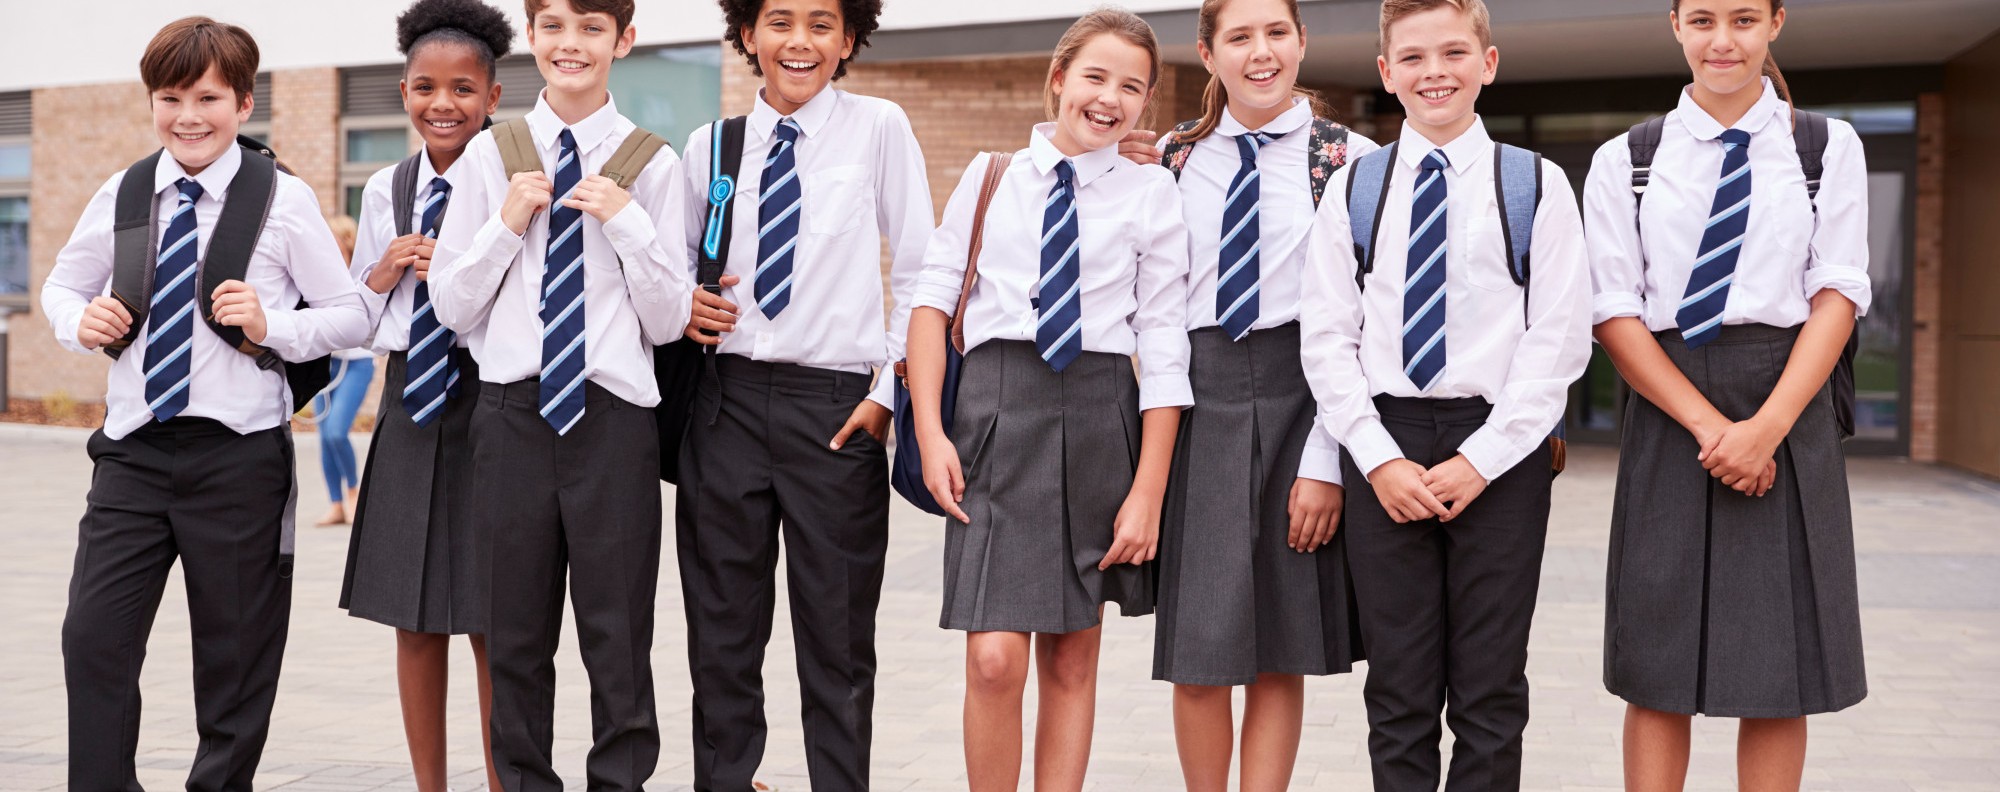 Why school uniforms may be a bad idea: students' sense of belonging is  negatively impacted by wearing them, a new study suggests